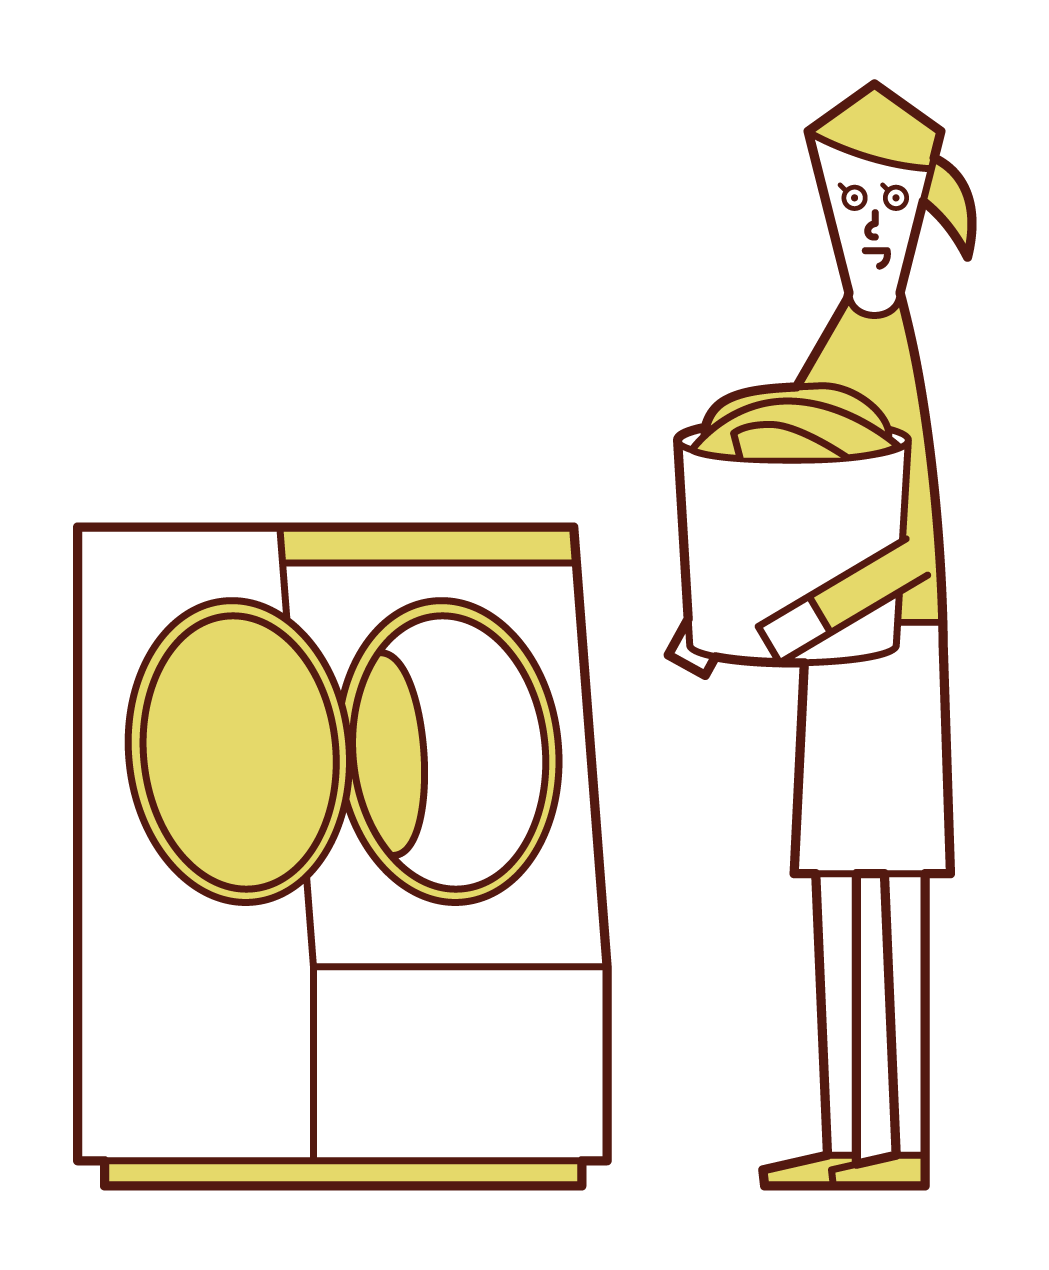 Illustration of a woman doing laundry